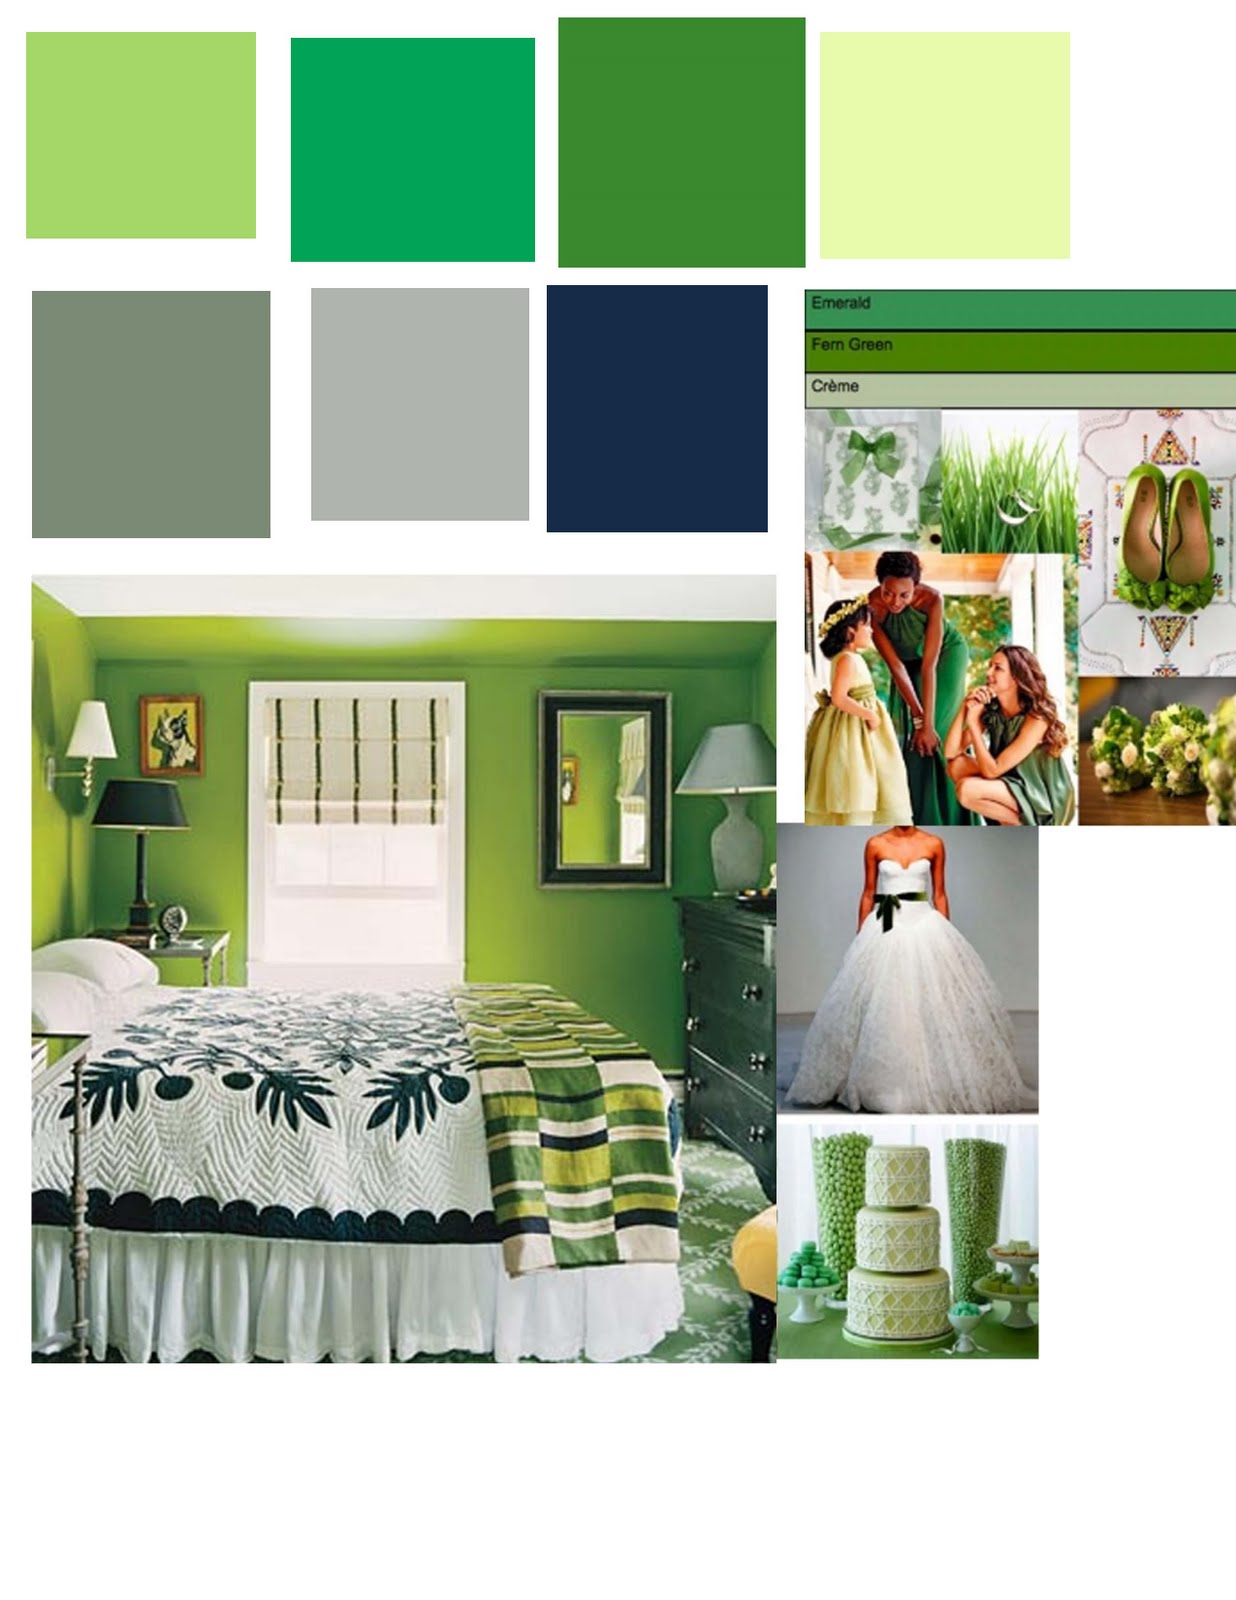 House in addition Green And Grey Color Scheme as well Small Shed 